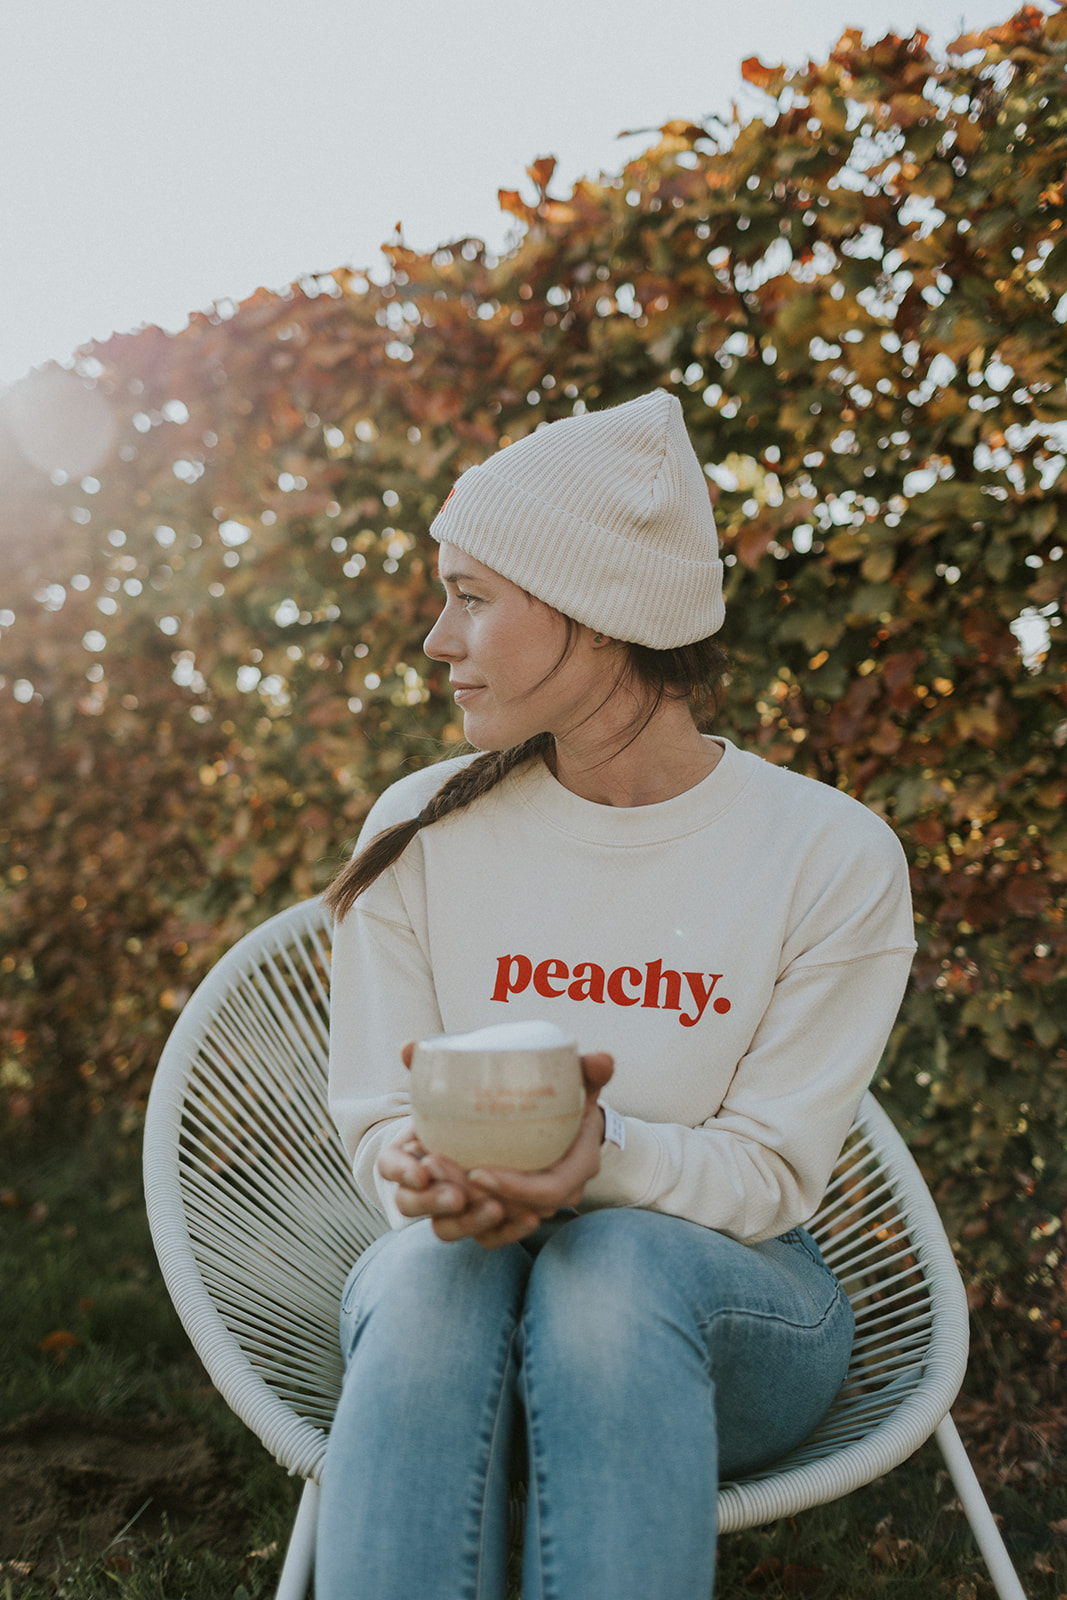 Peachy cropped sweater by Mangos on Monday